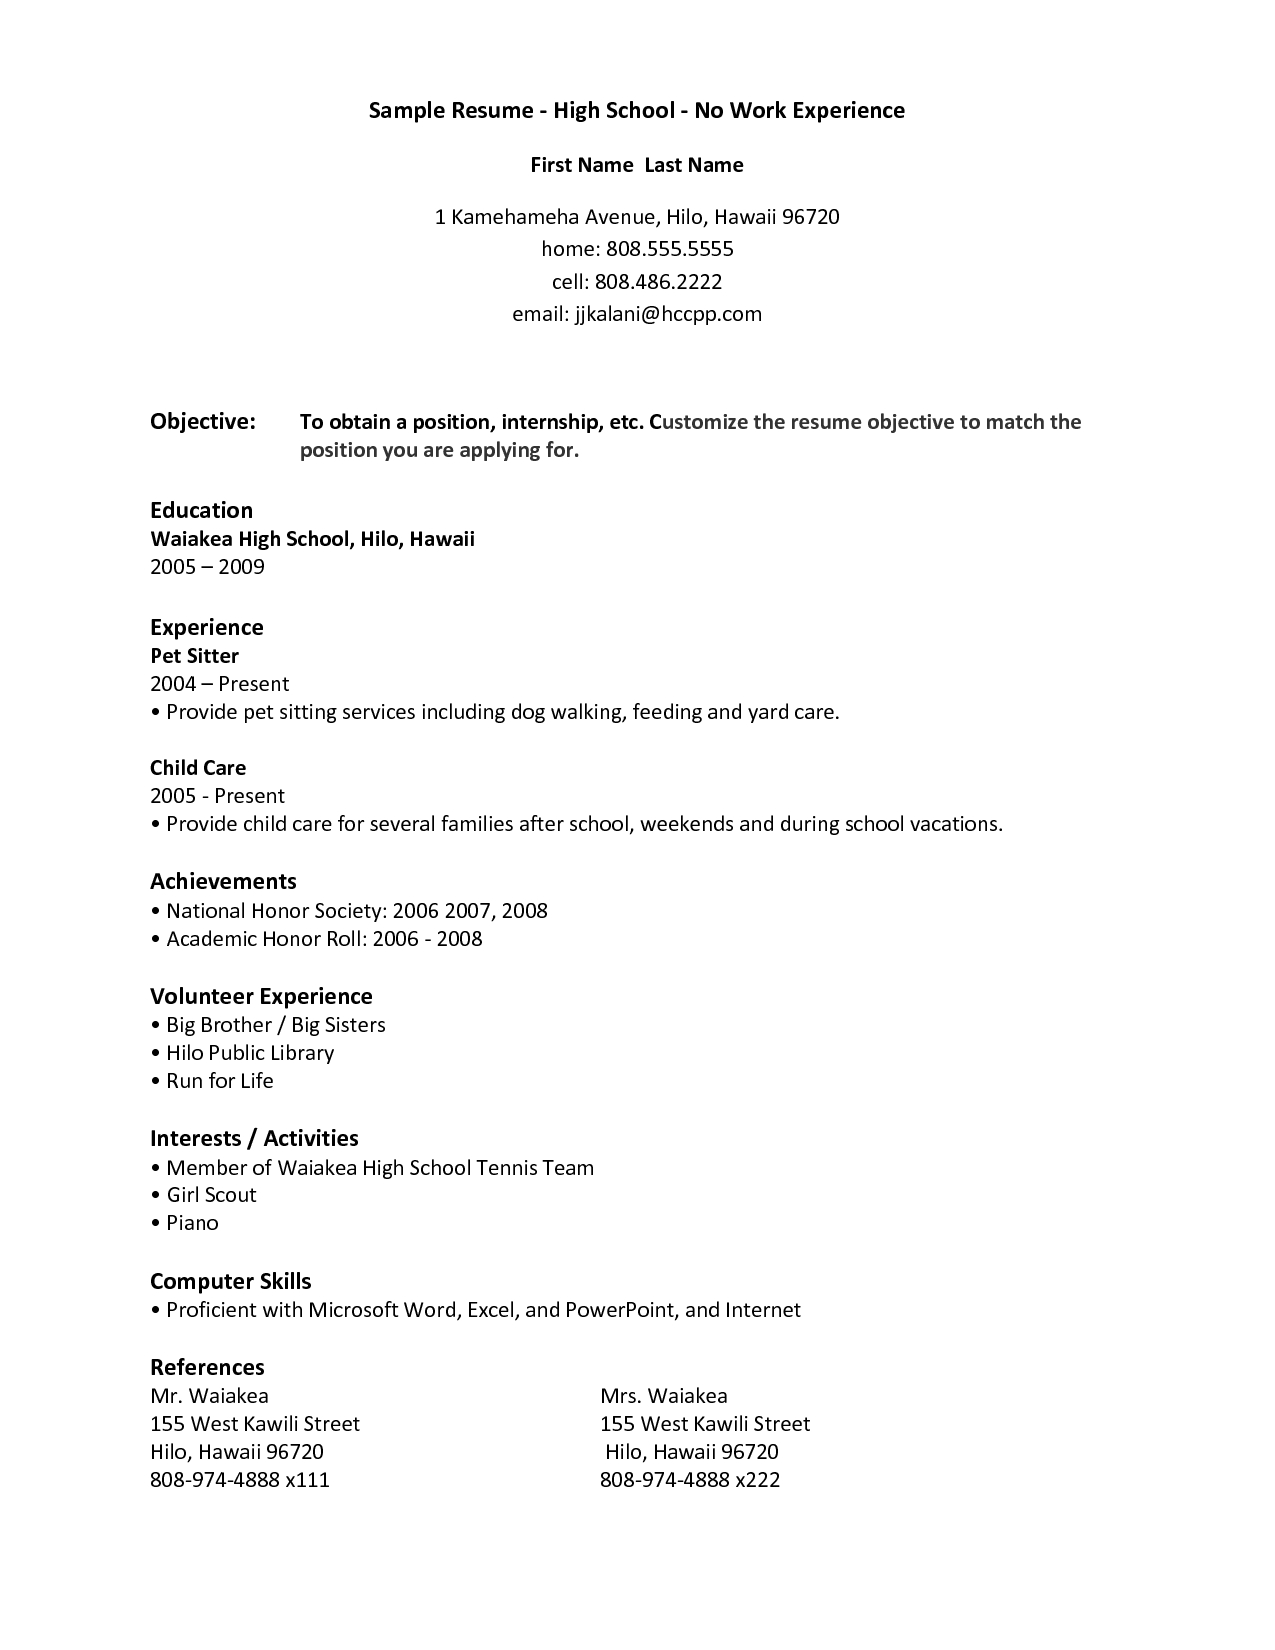 Resume Examples Little Work Experience Student Resume in sizing 1275 X 1650